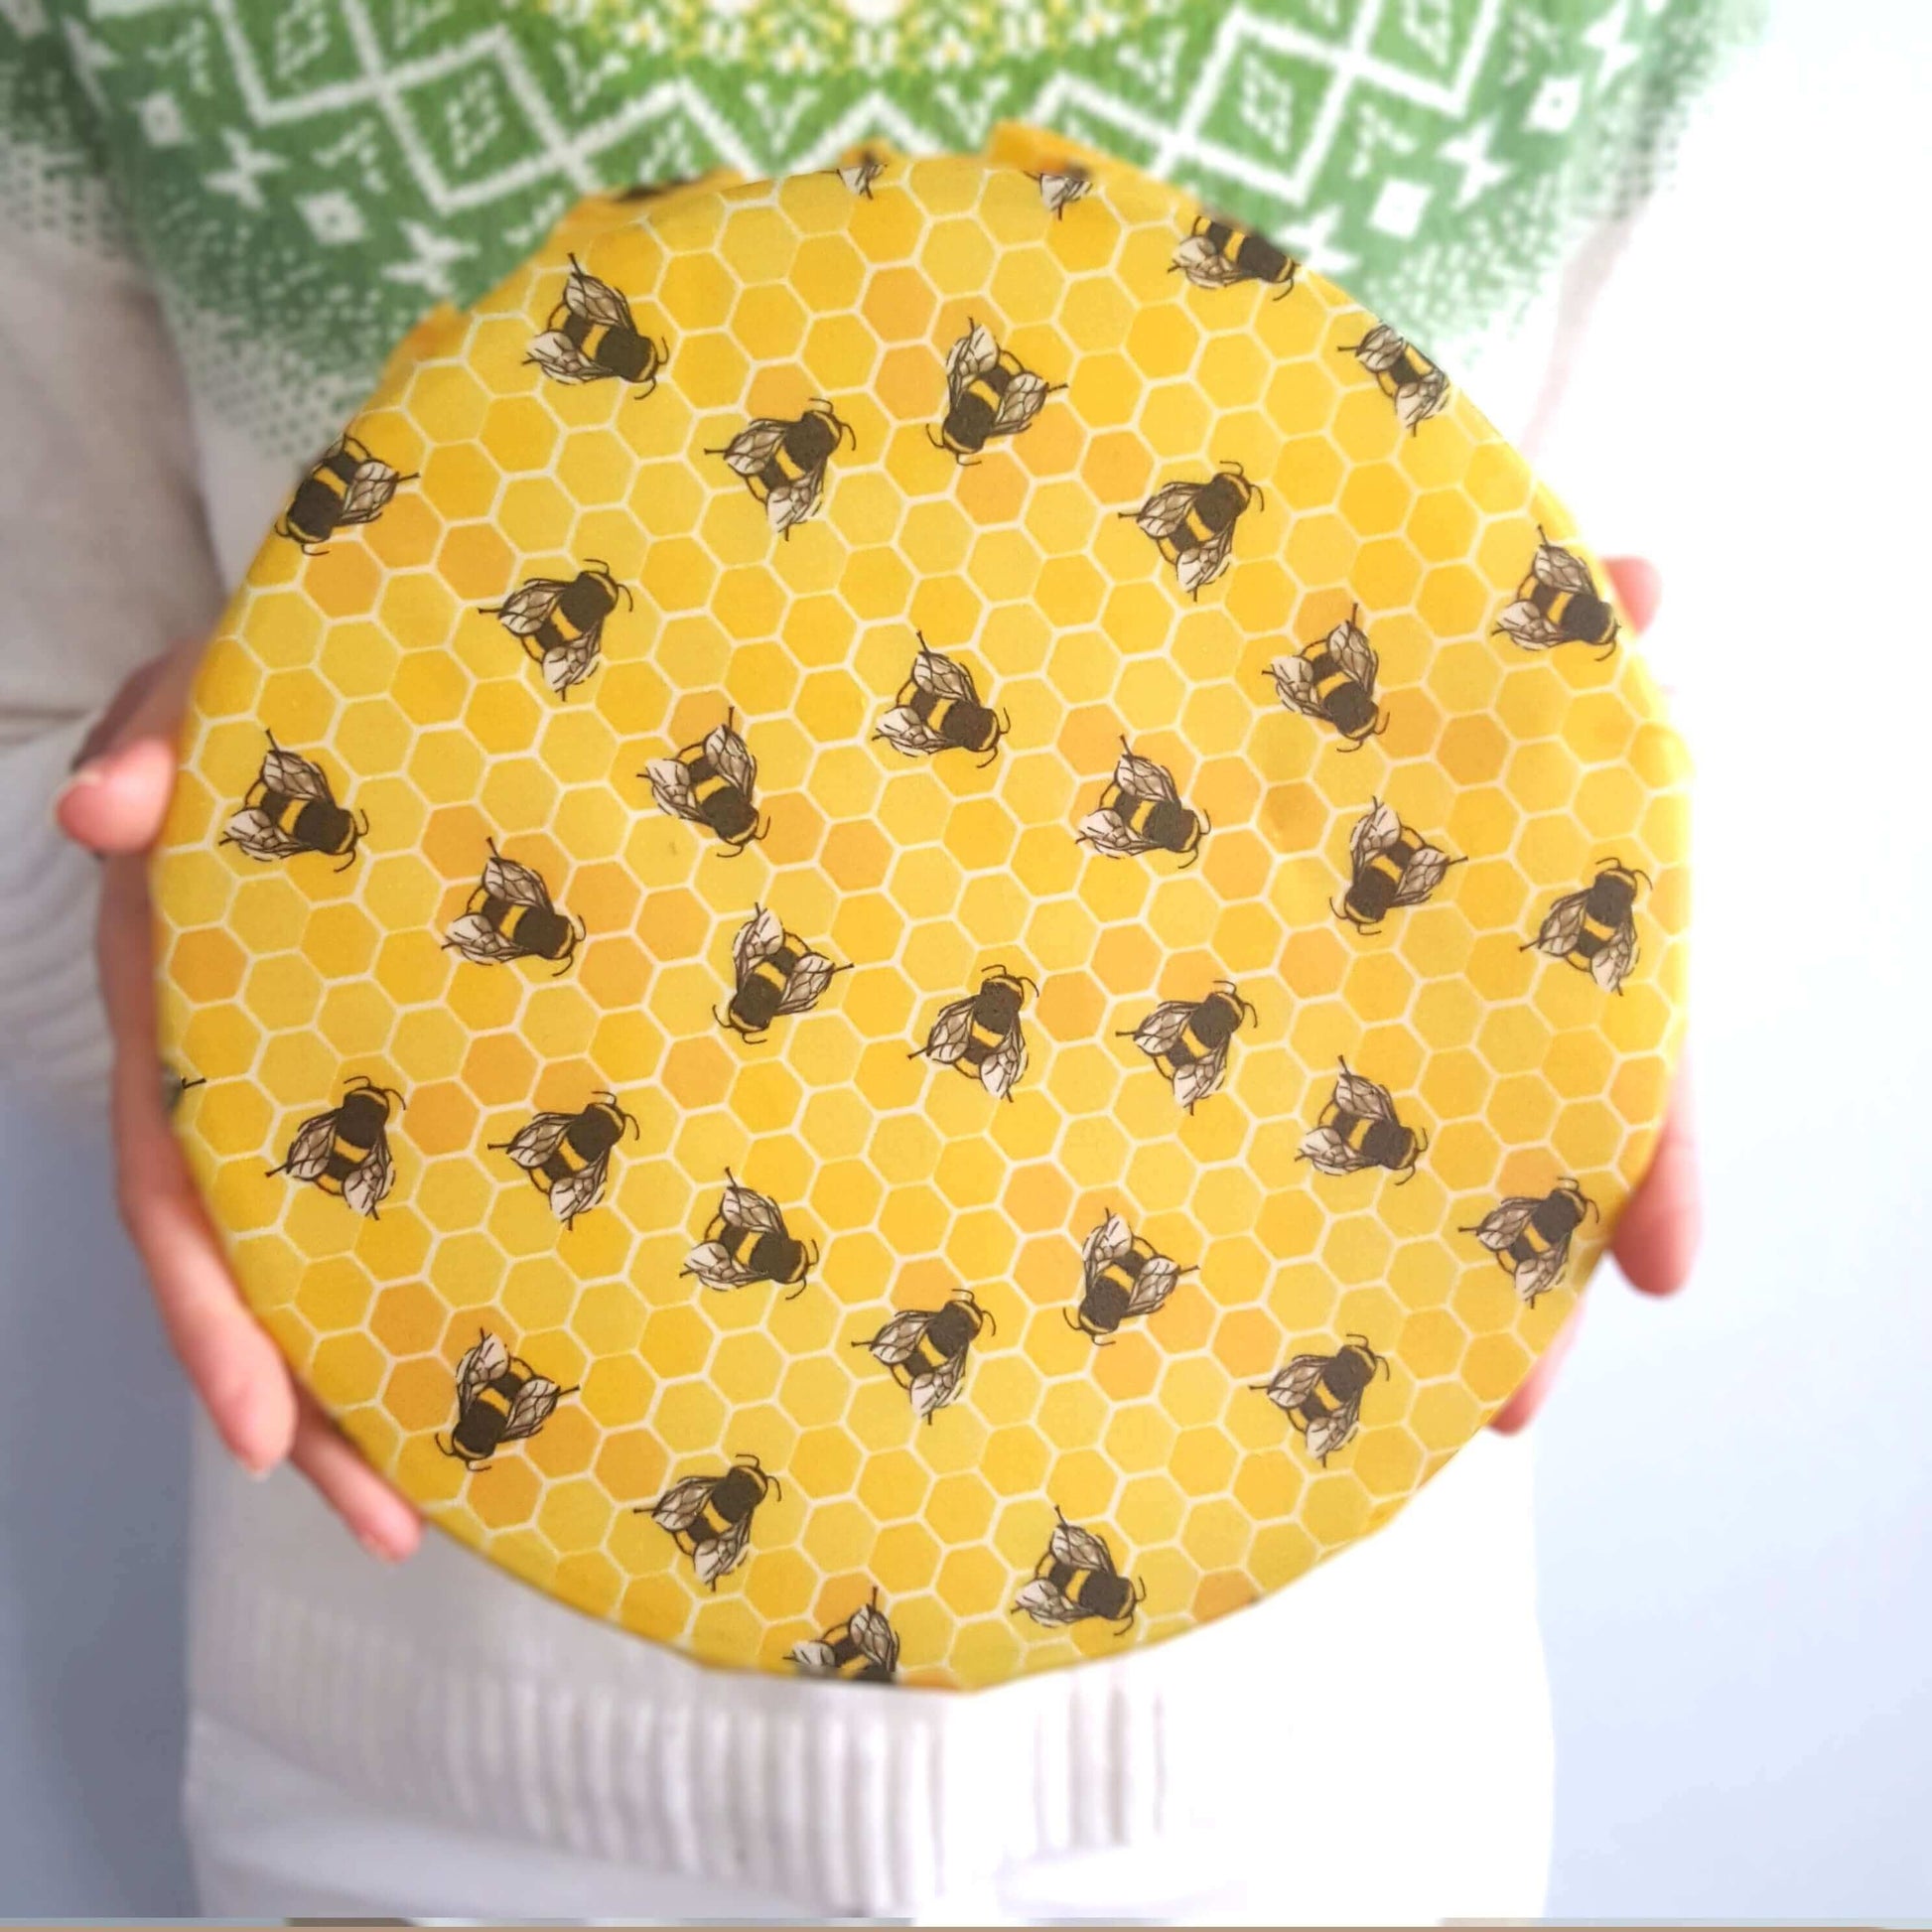 Reusable Beeswax Food Wraps 100% Hand Made in the UK by Honey Bee Good shown in Set of 3 Classic Yellow Bees on bowl